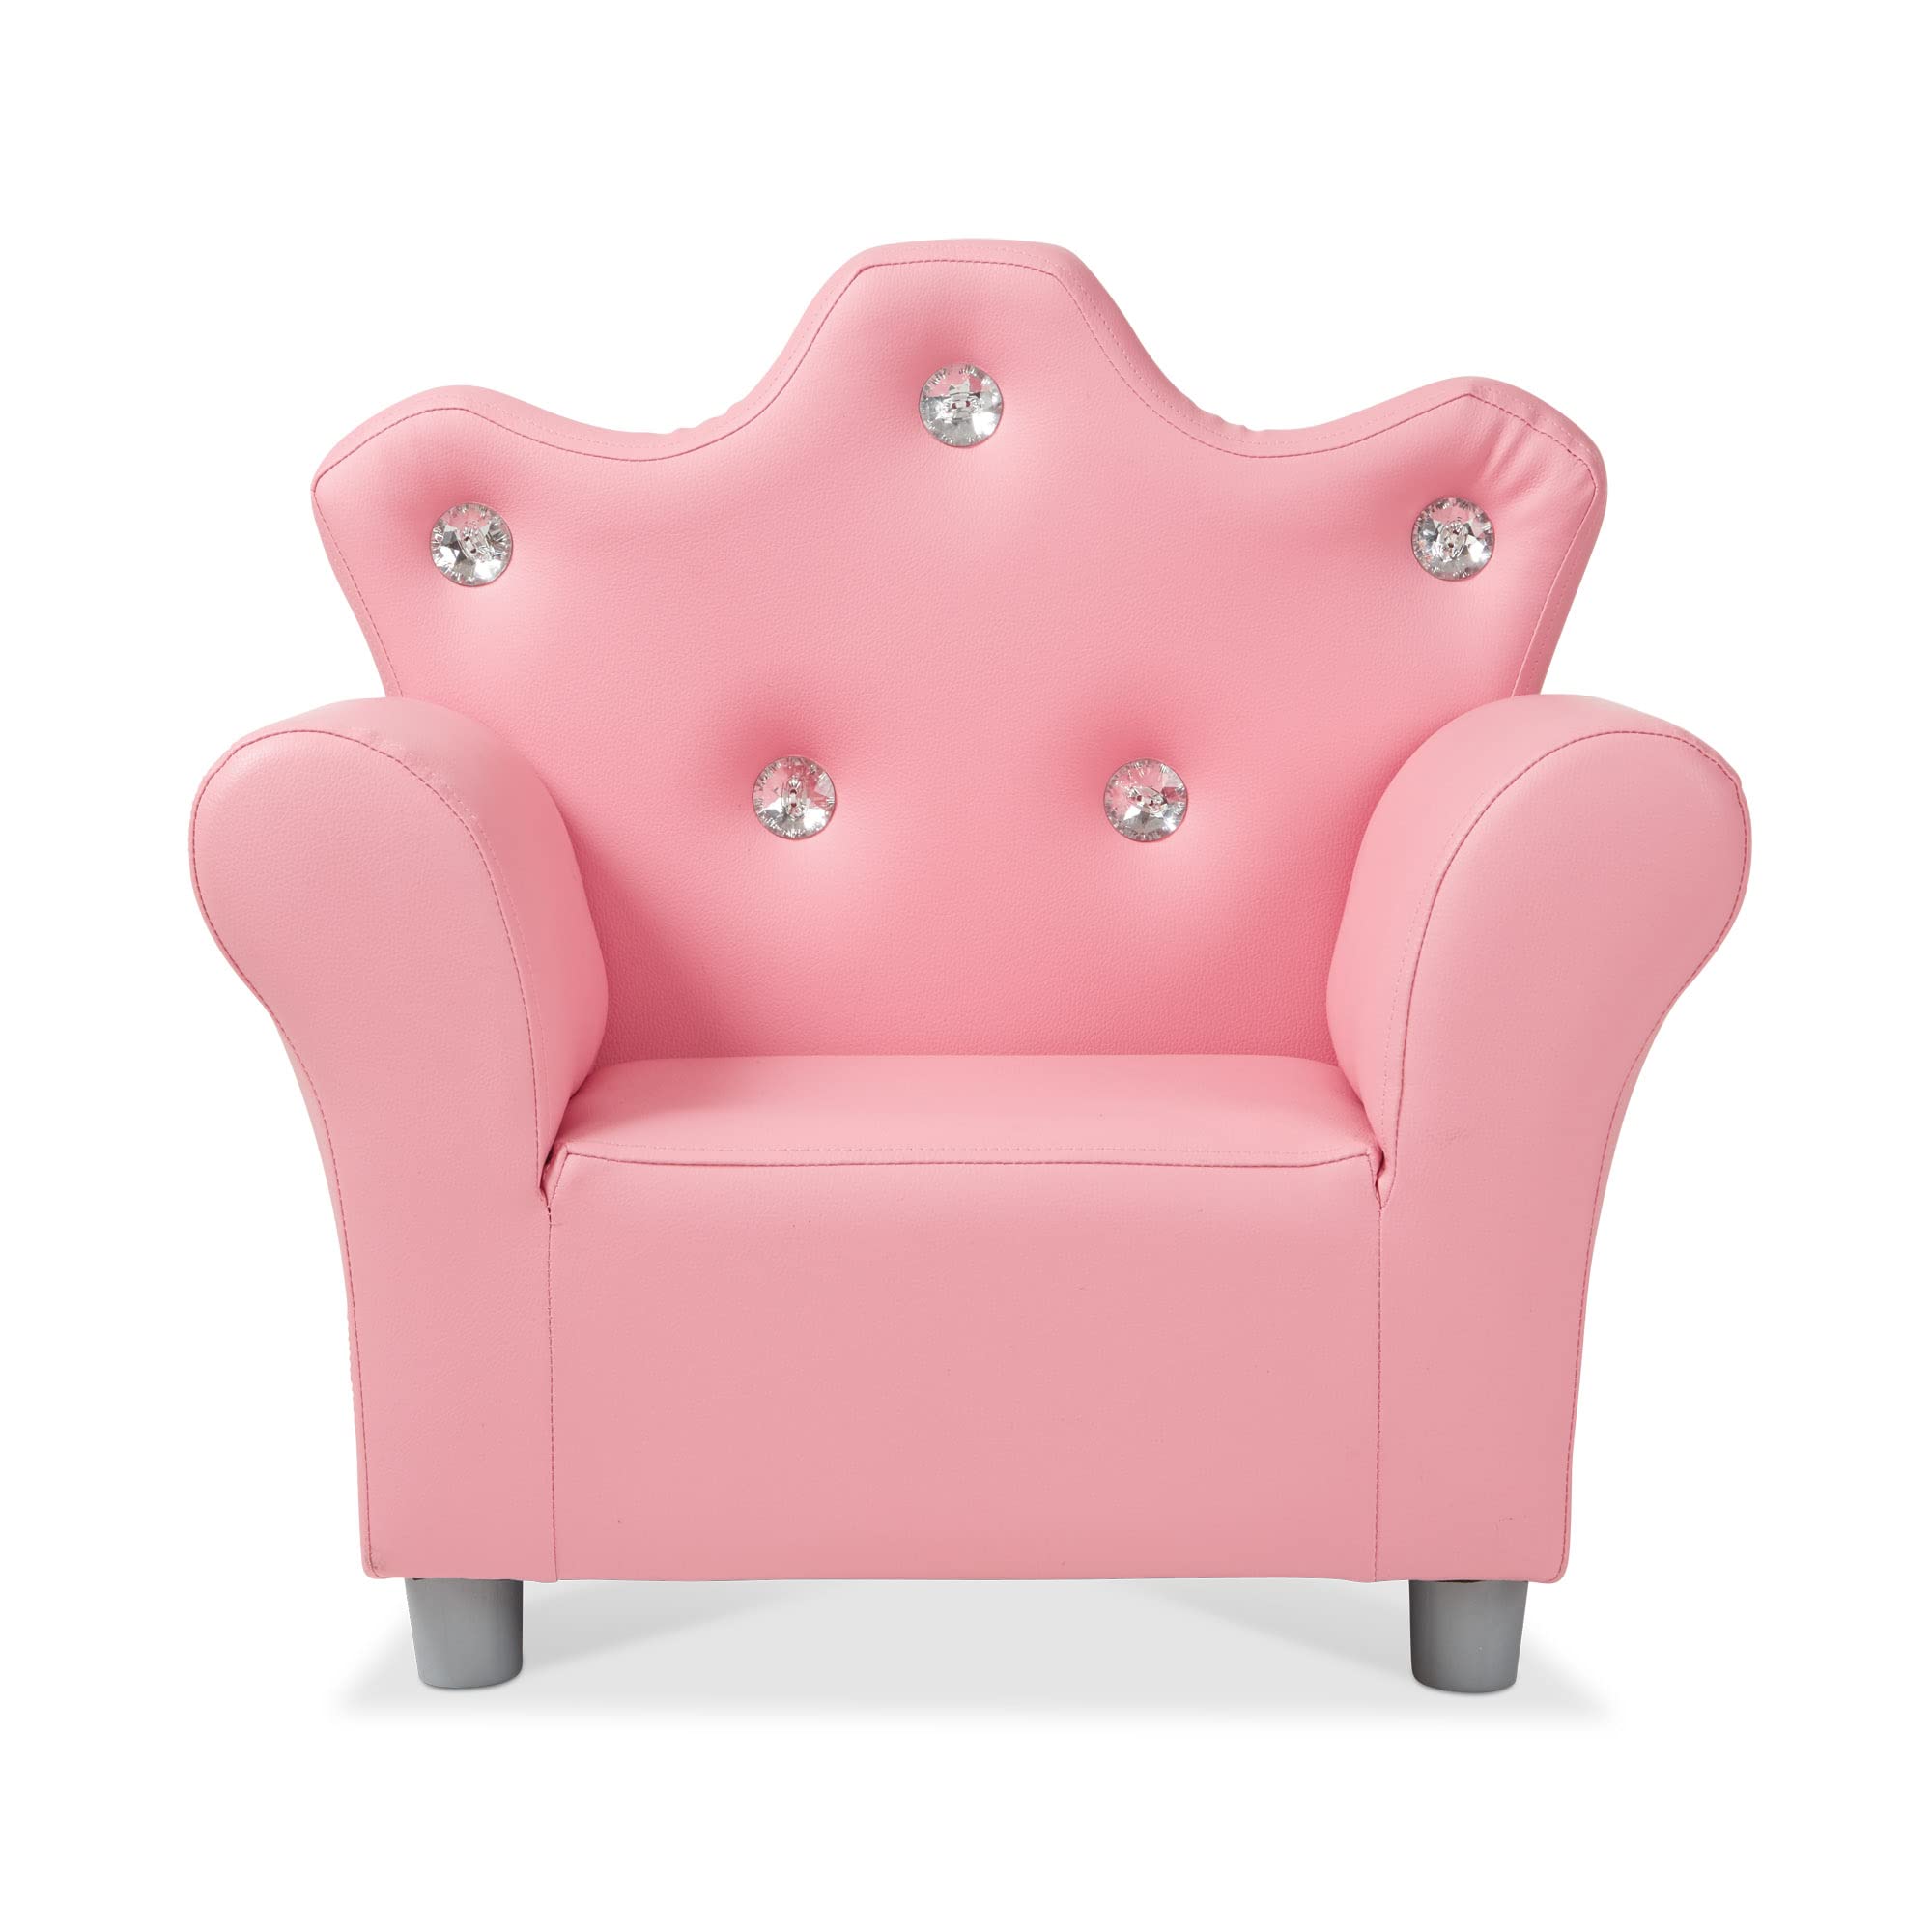 Melissa & Doug Pink Faux Leather Child’s Crown-Back Armchair (Kid’s Furniture) - Princess Chair For Toddlers, Children's Furniture, Pink Chair For Kids